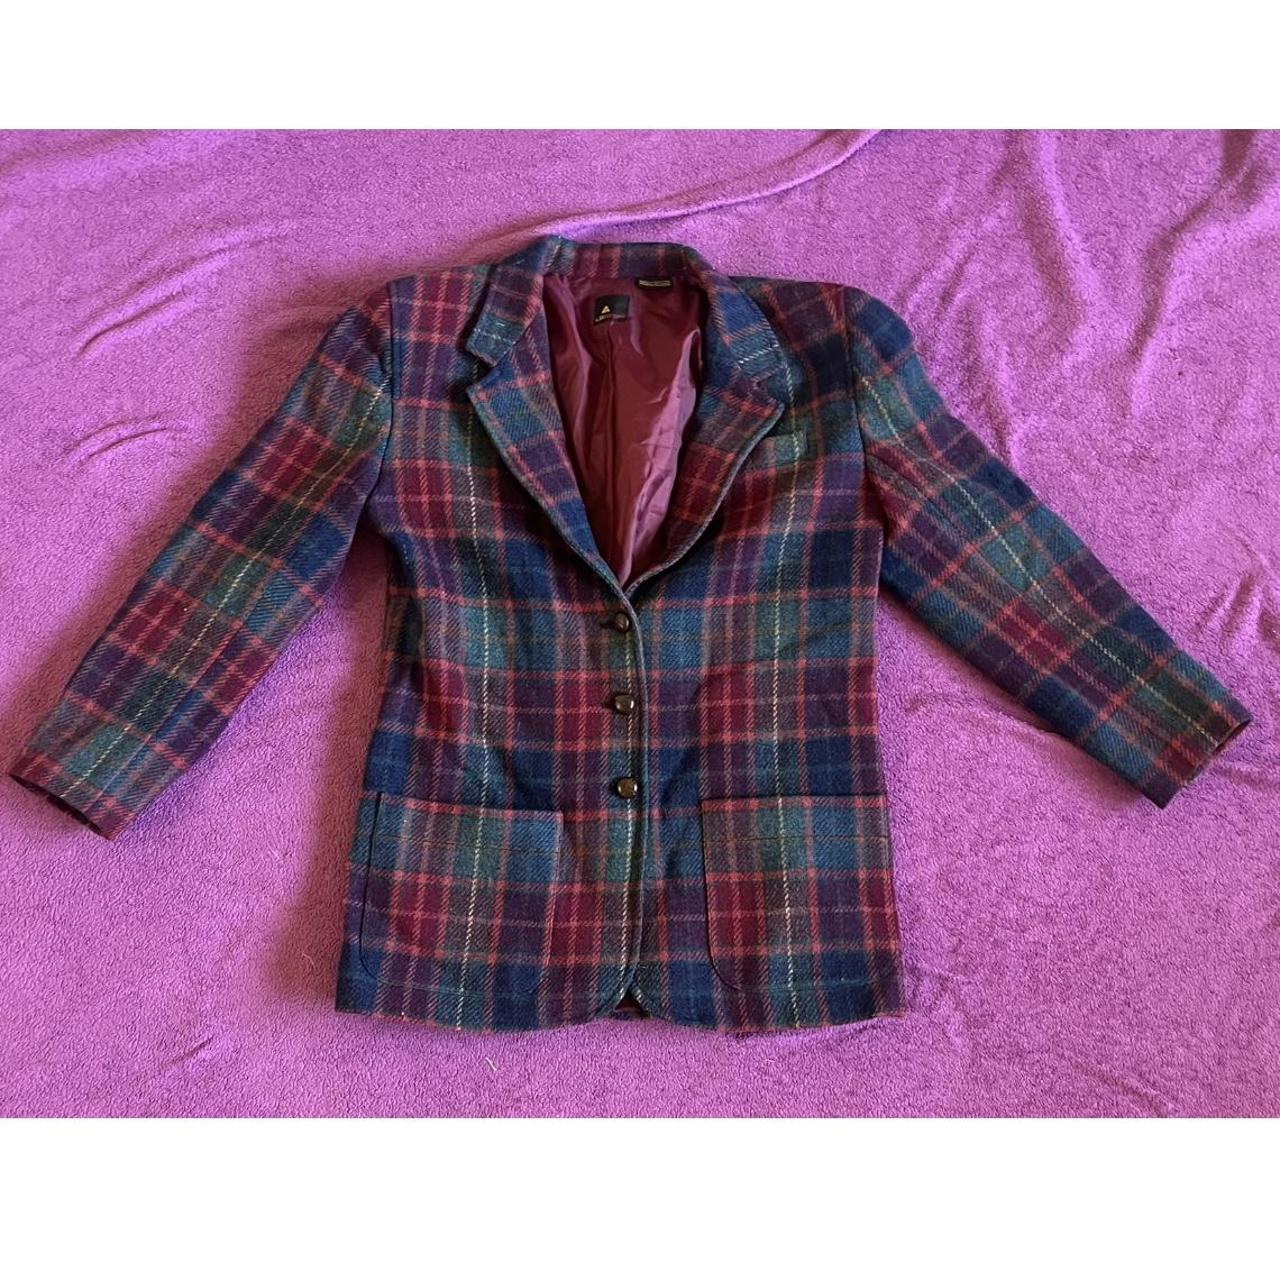 item listed by tallbxtchthrift